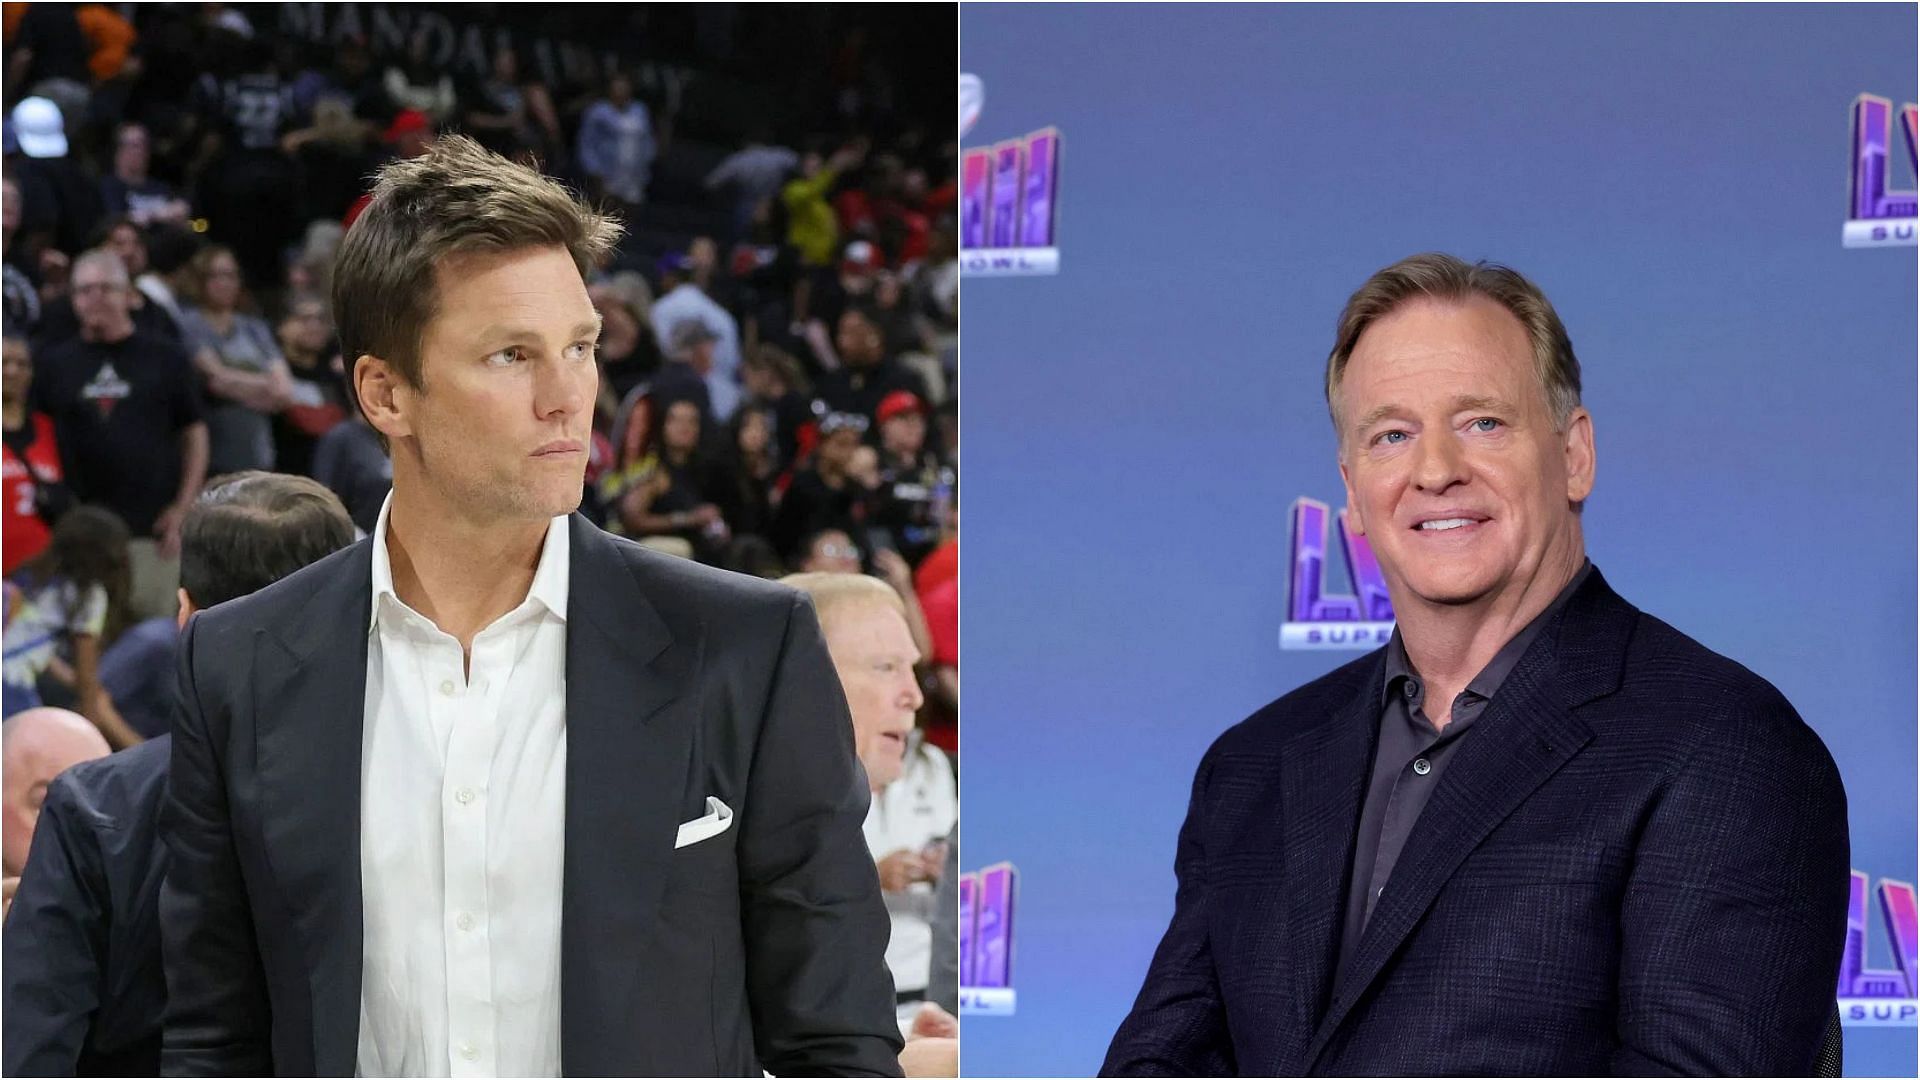 Tom Brady will have to wait as per Roger Goodell